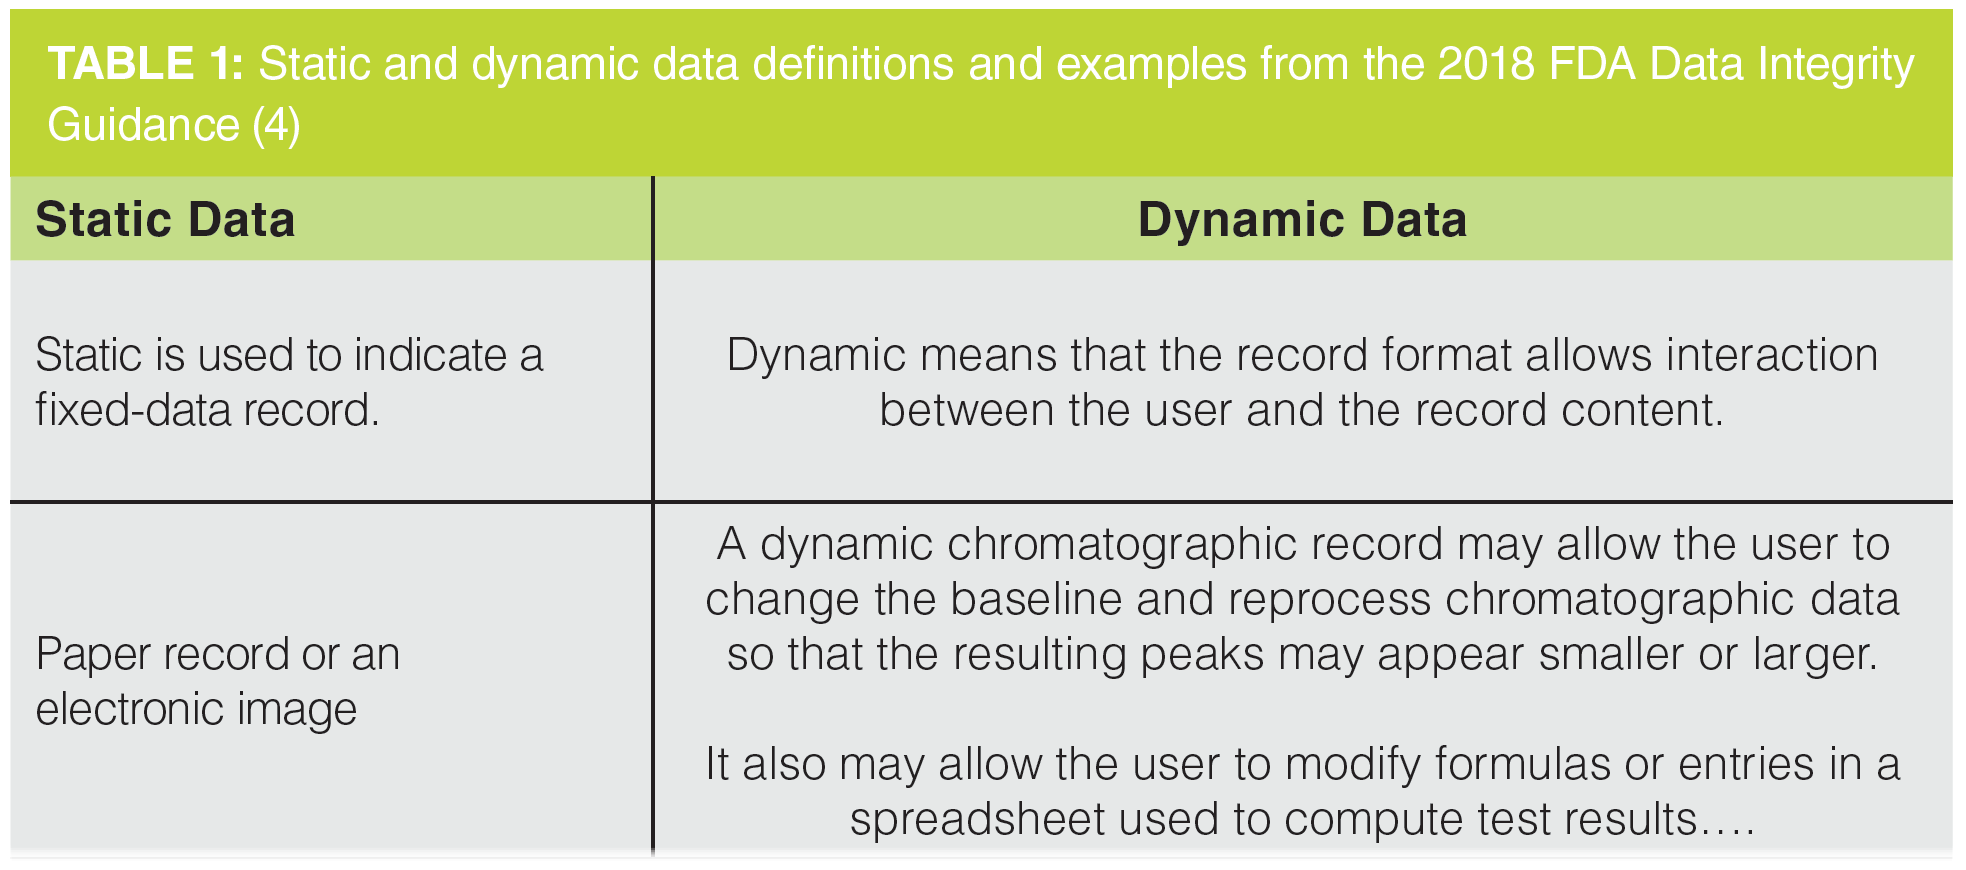 What are two examples of static data?